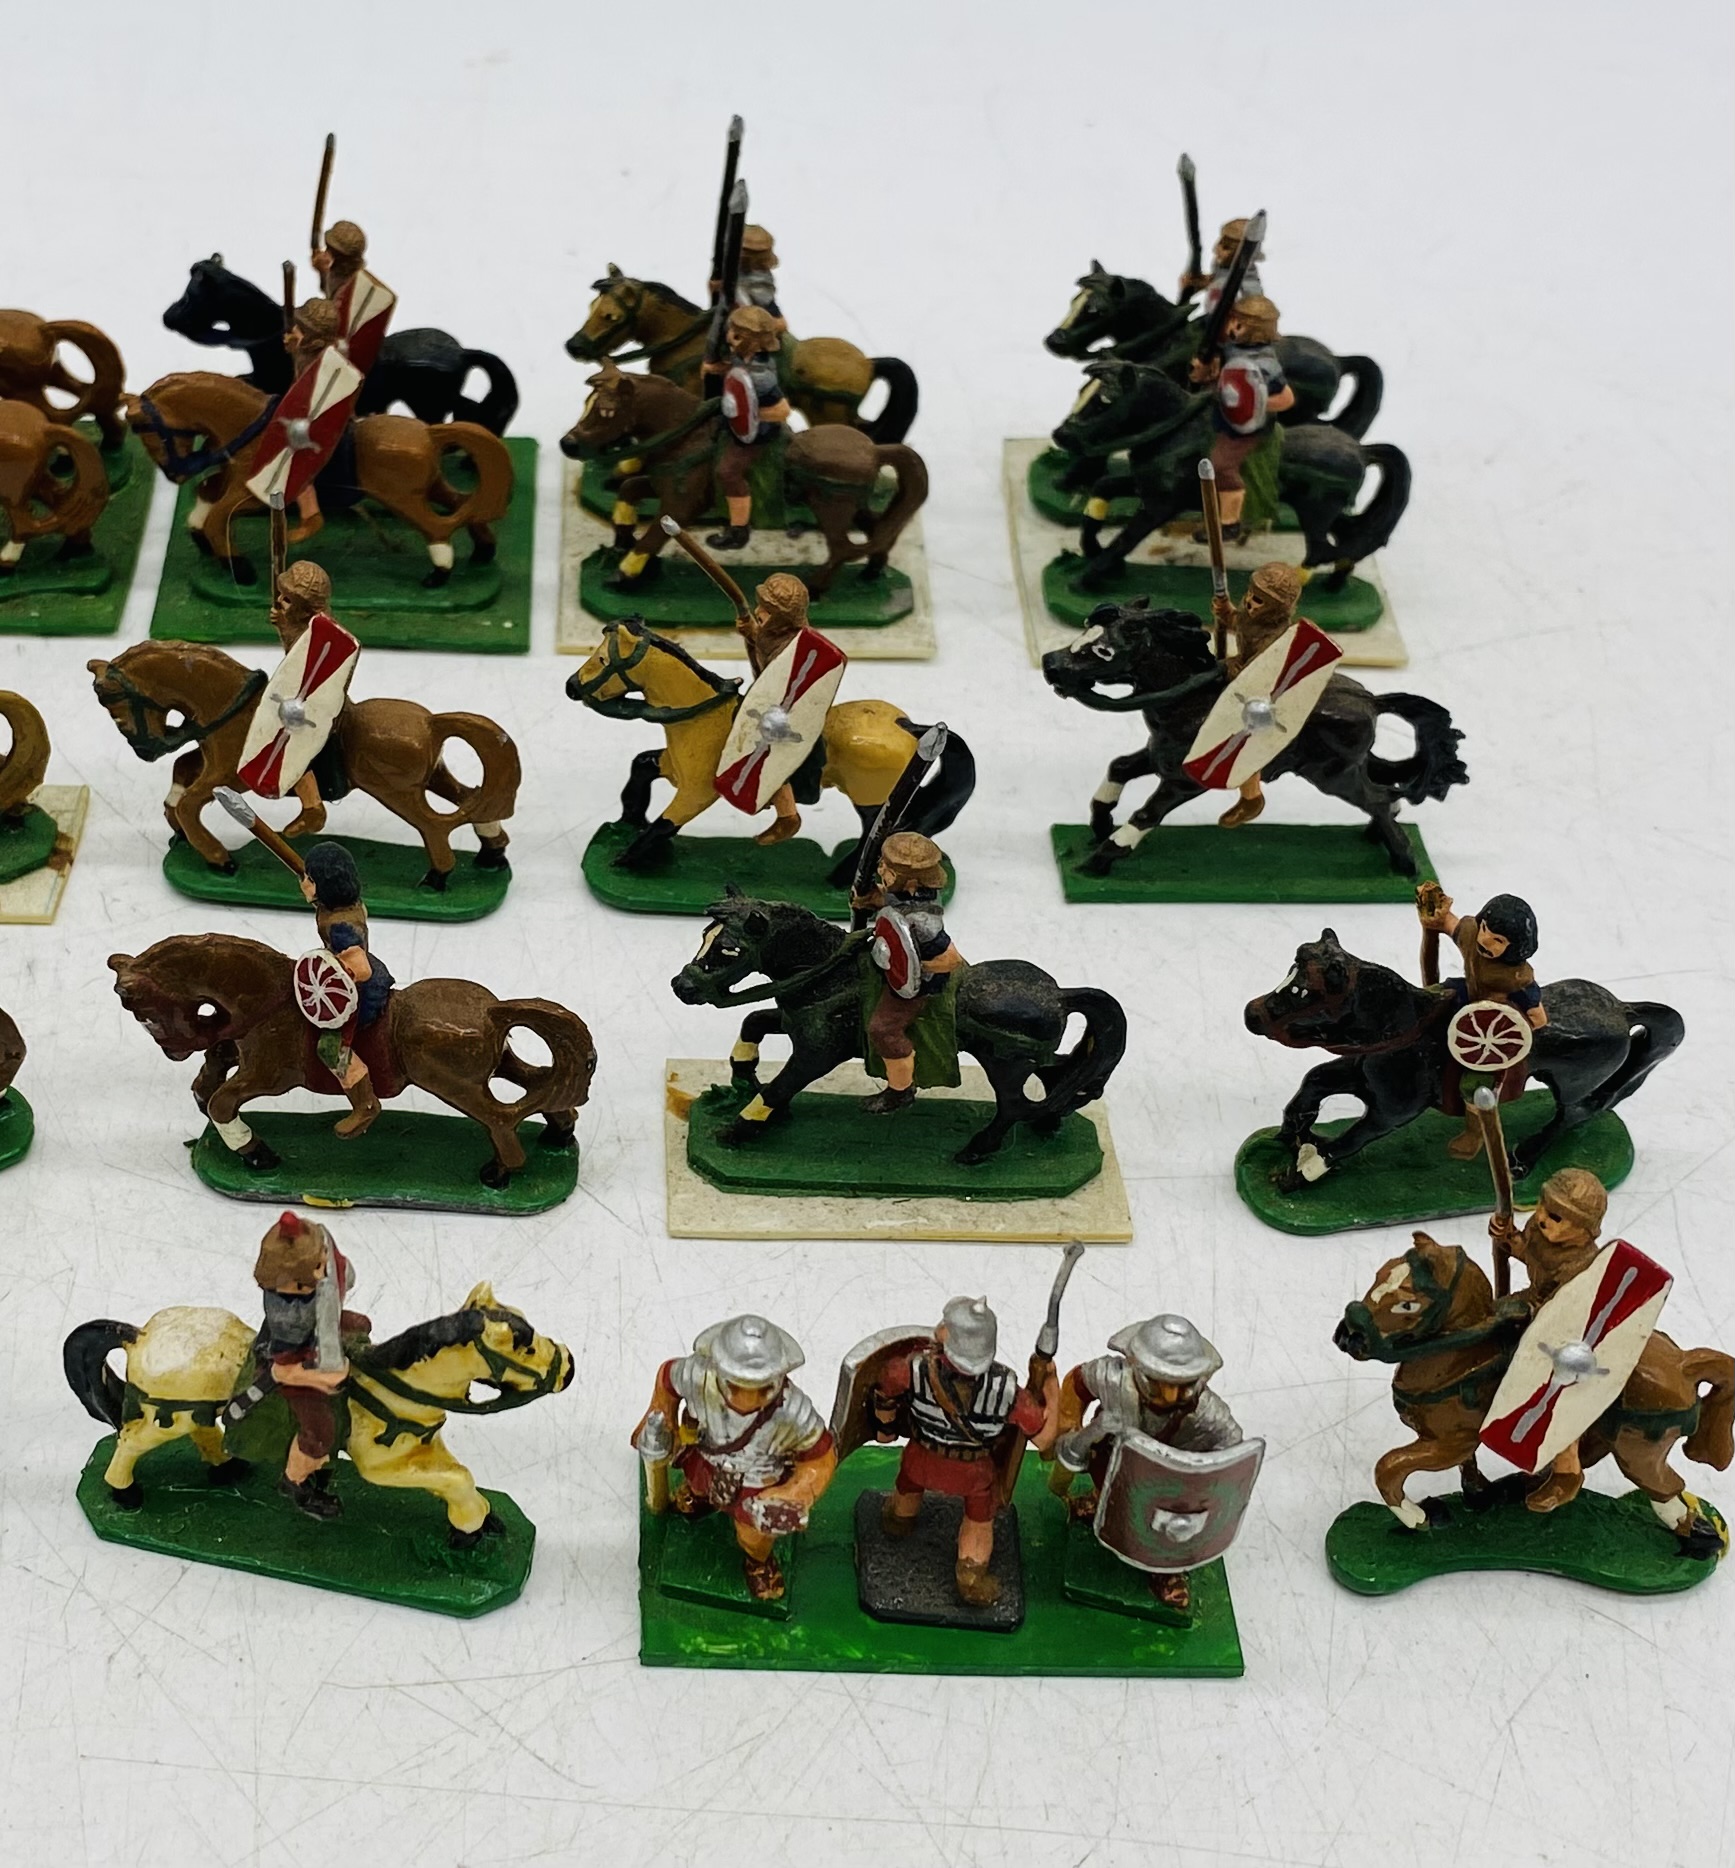 A collection of metal miniature figurines relating to the Roman era including some on horseback - Image 5 of 5